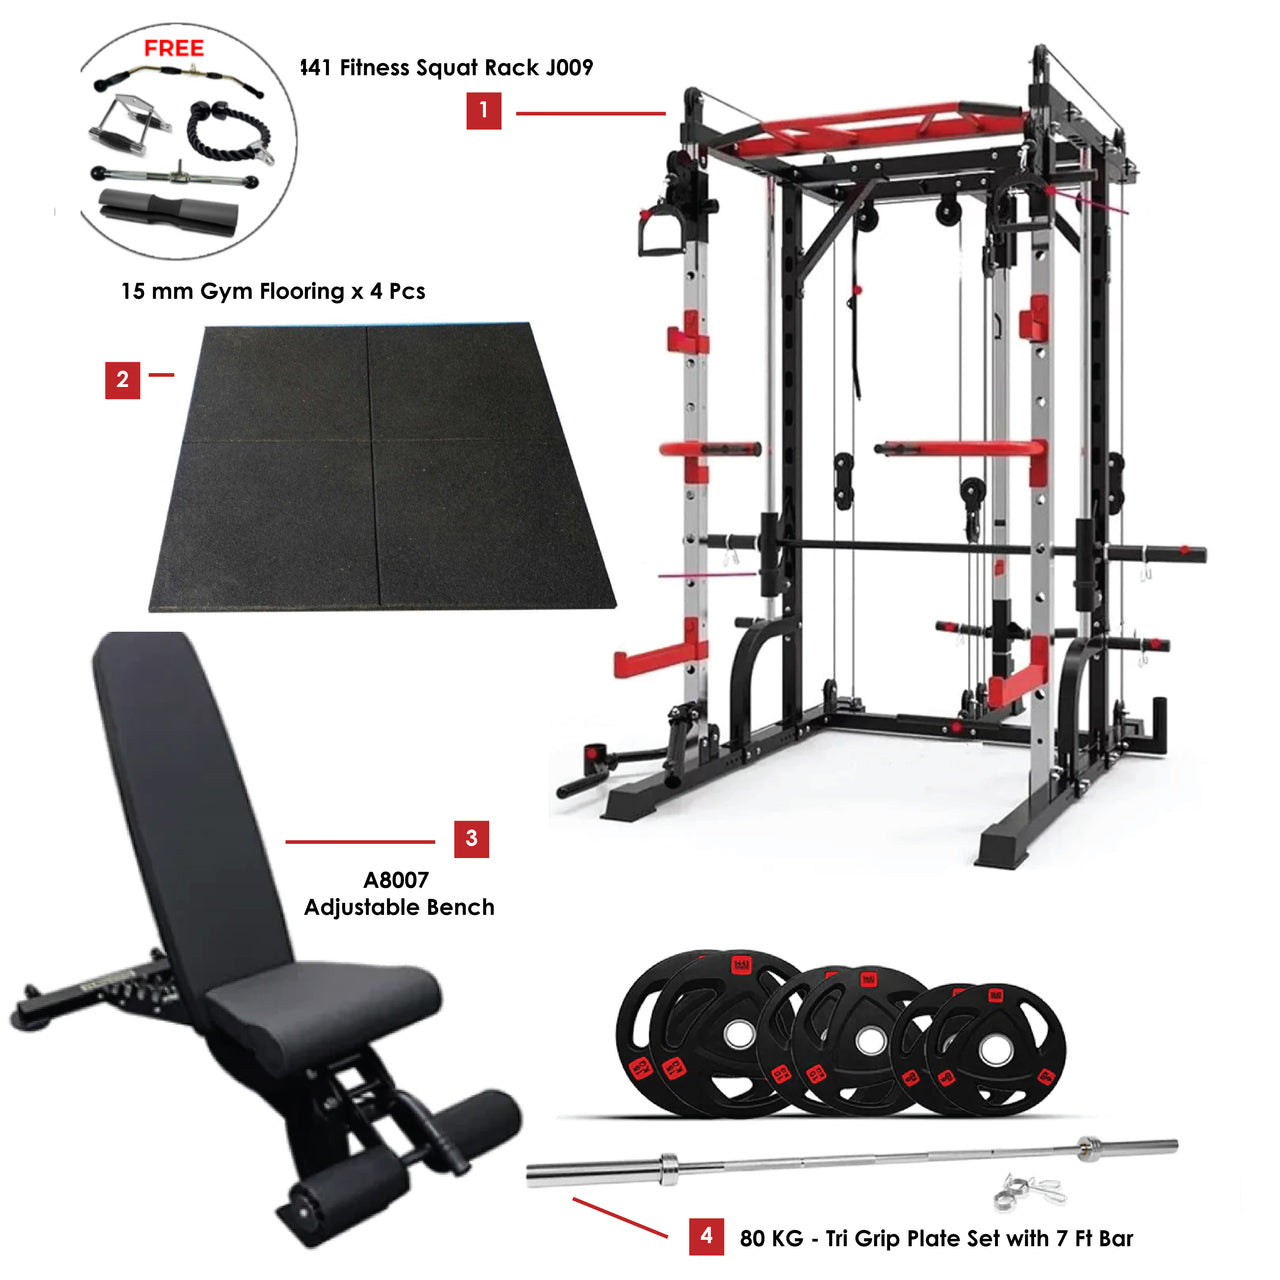 Combo Deal - 1441 Fitness Smith Machine with Functional Trainer J009 + 80kg Tri Grip Plate Set + Adjustable Bench A8007 + Flooring